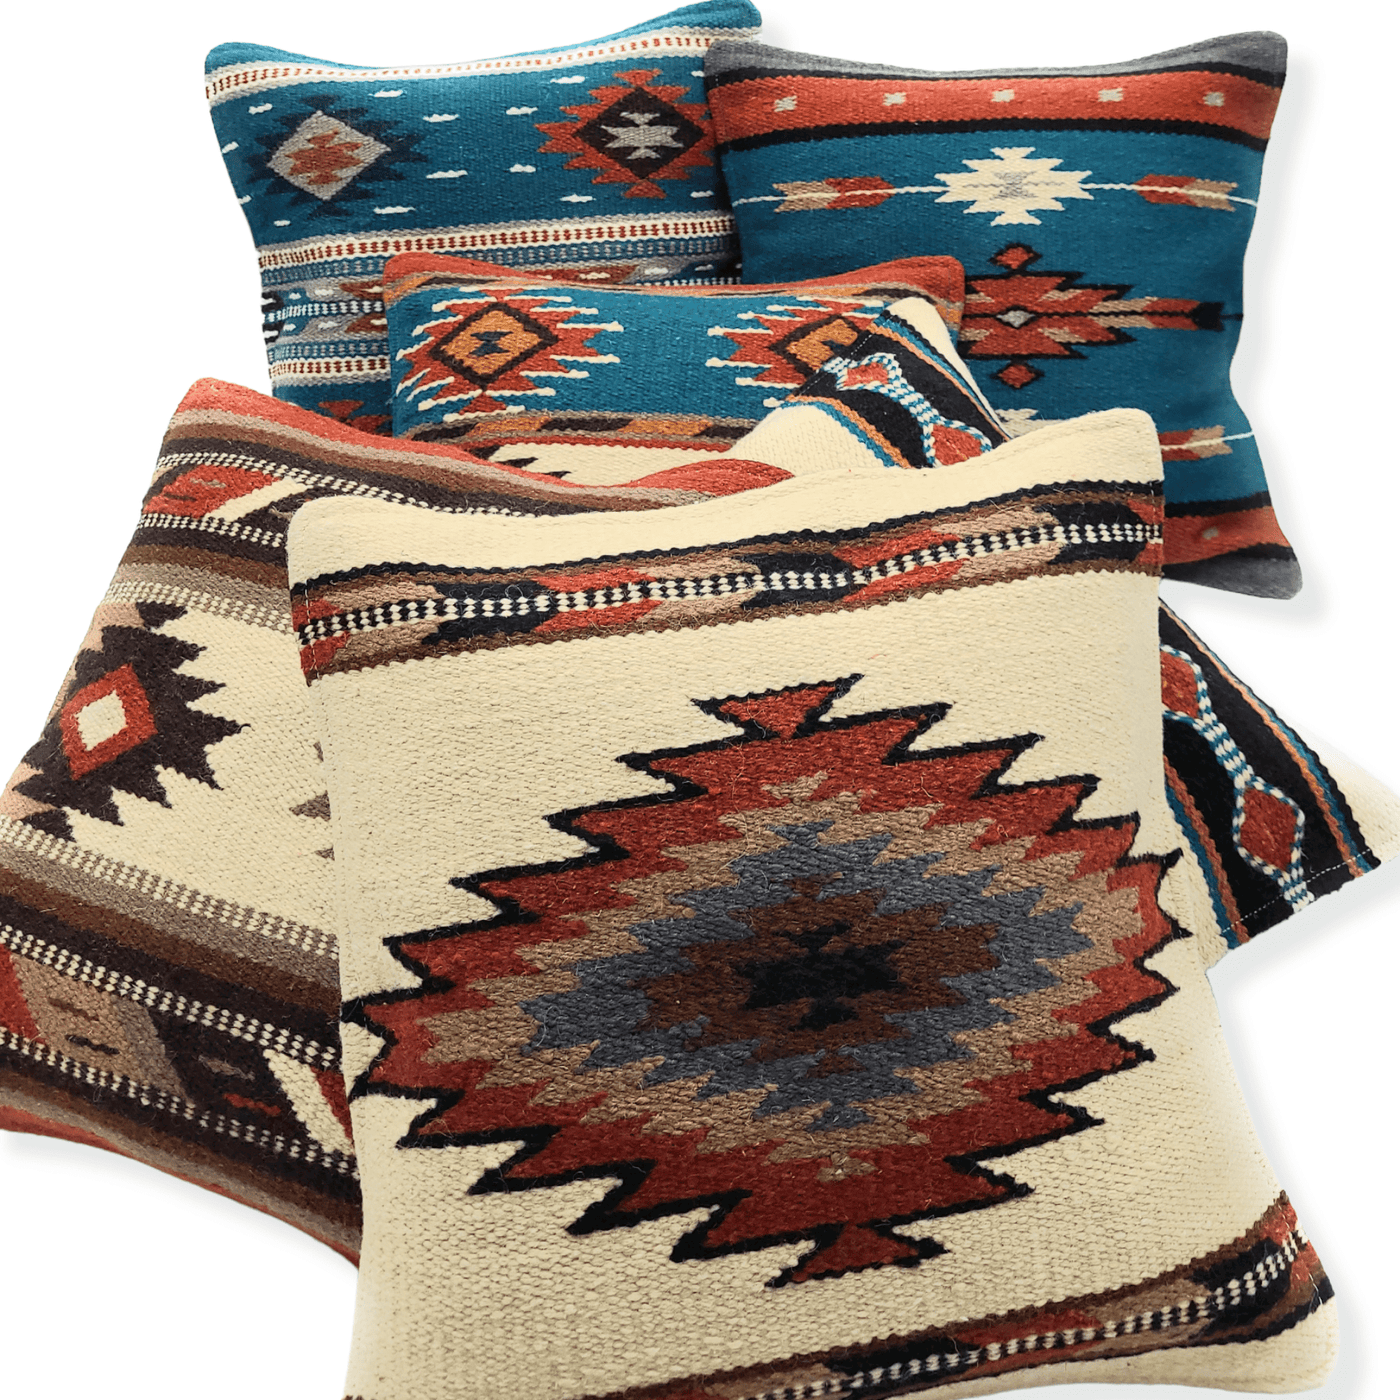 Southwestern Wool Pillow Covers- The Pueblo 20 Assorted Colors- 18